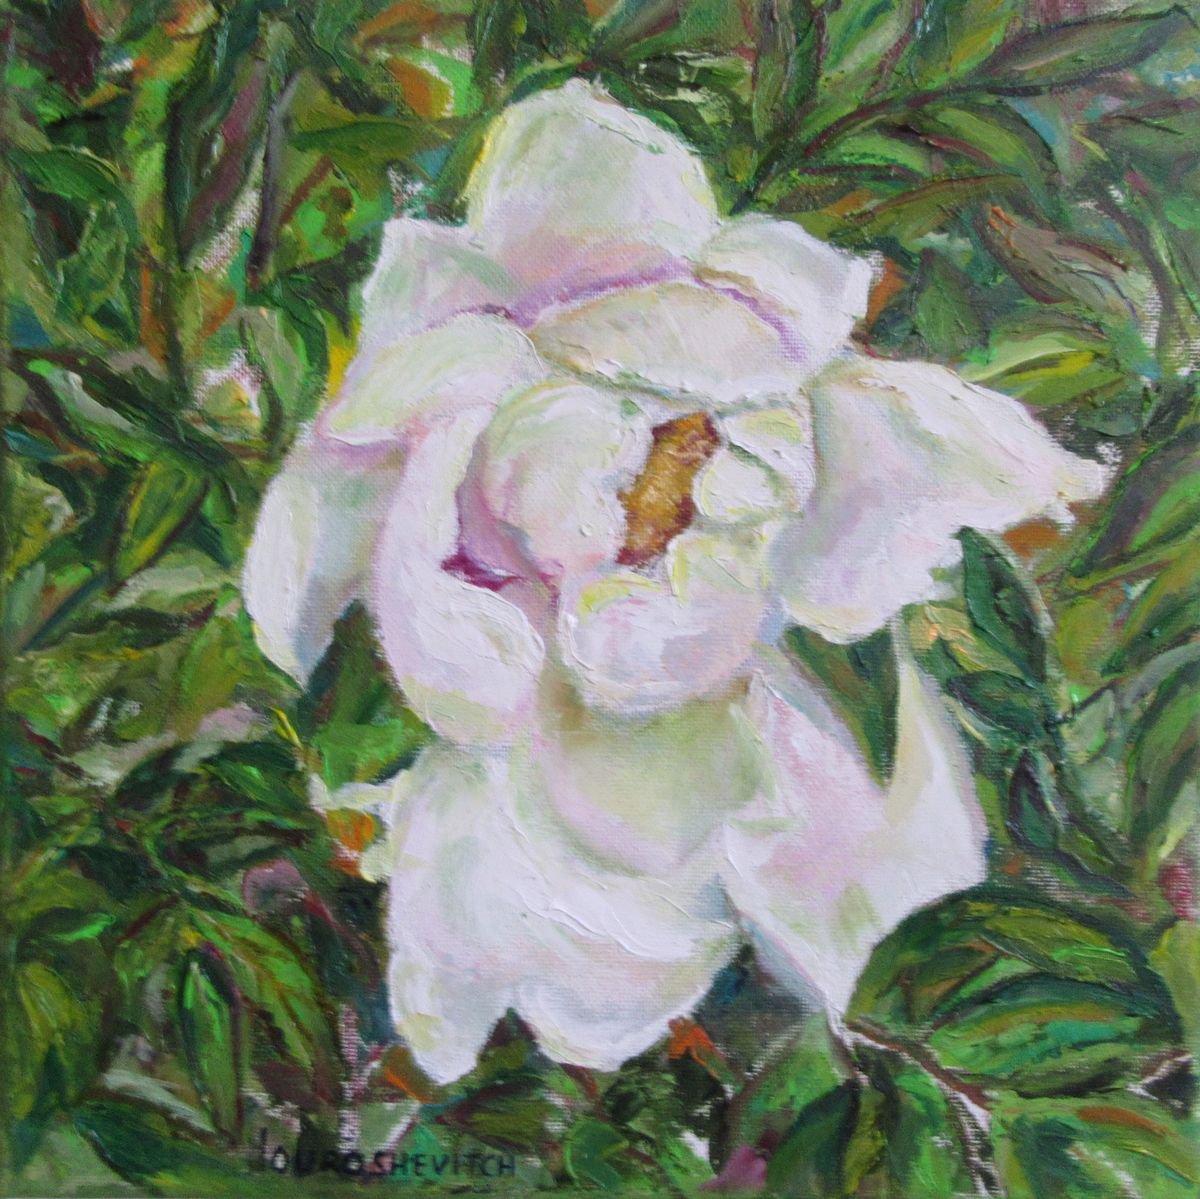 Original Oil Painting of a Tree Peony Romantic one of a kind Impressionistic Blooming flow... by Katia Ricci